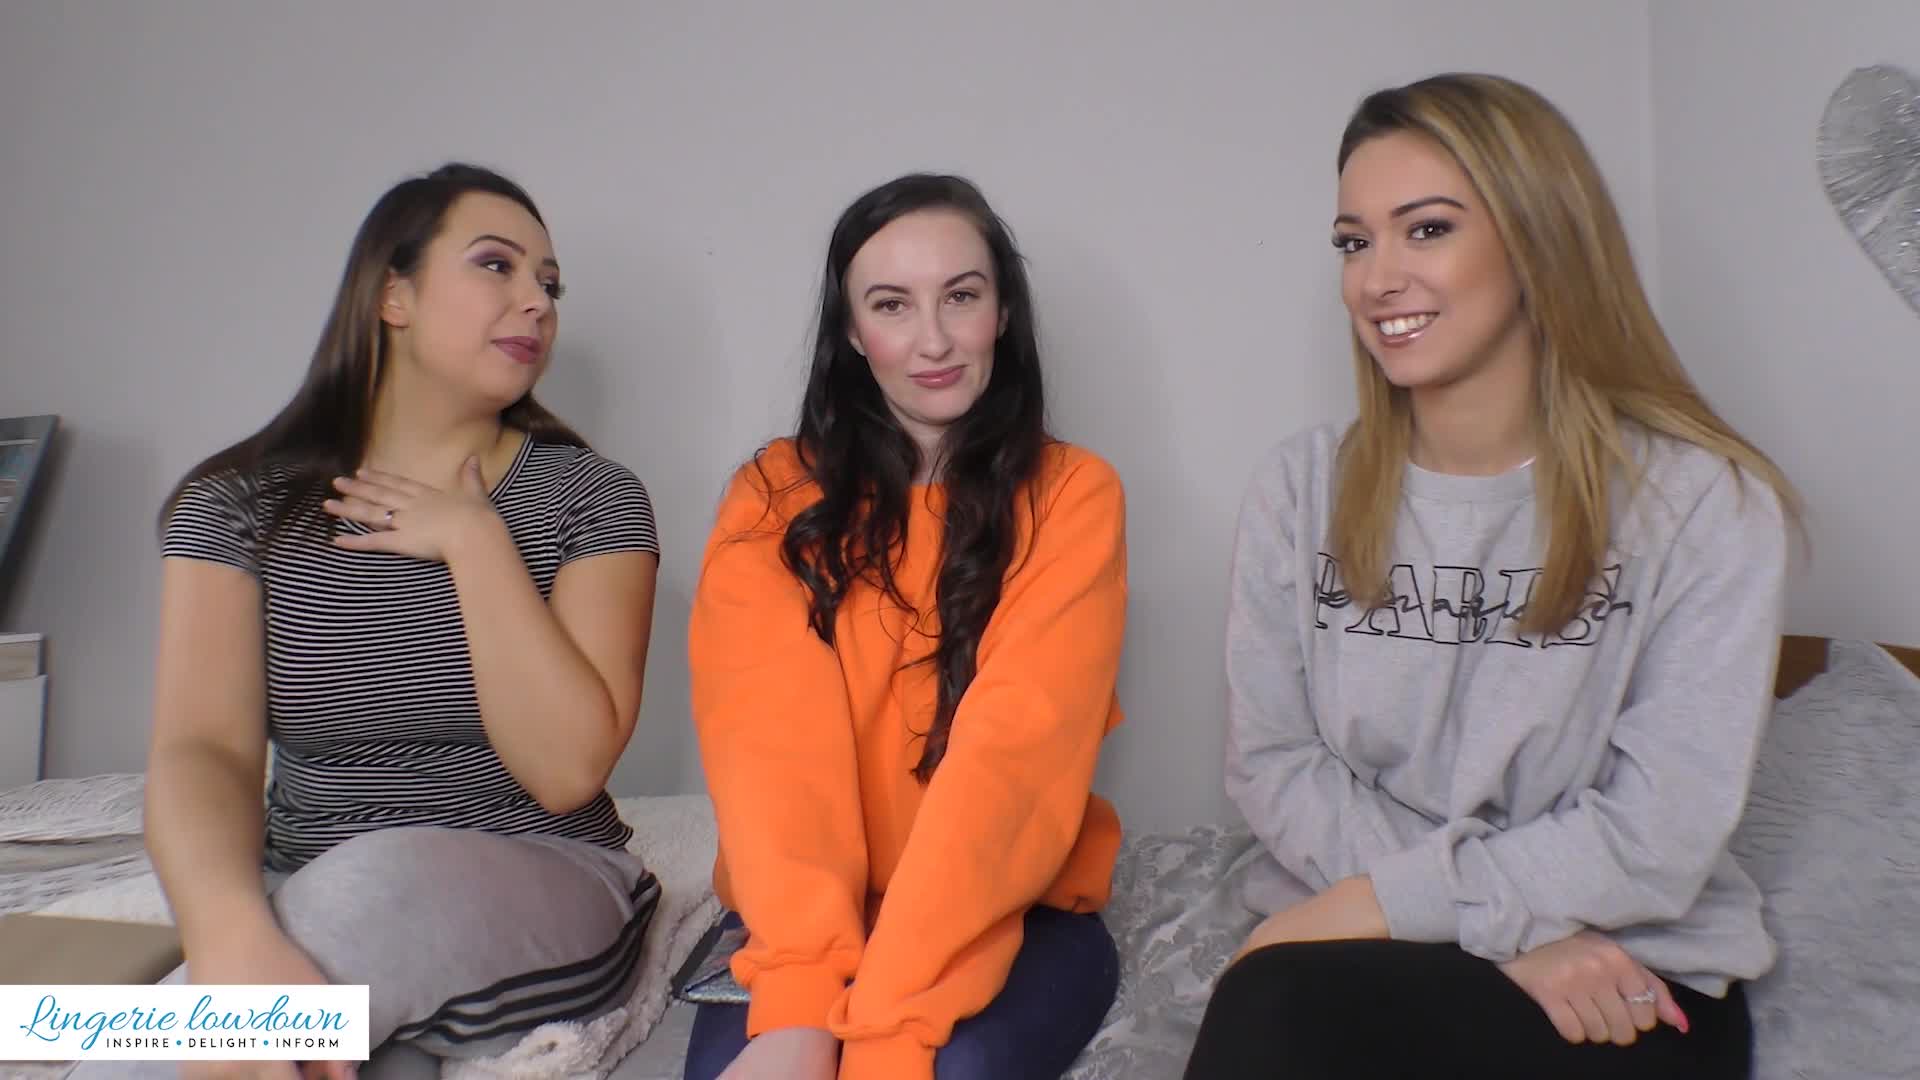 Alicia, Sophia Smith and Lauren Louise review gifts from each other